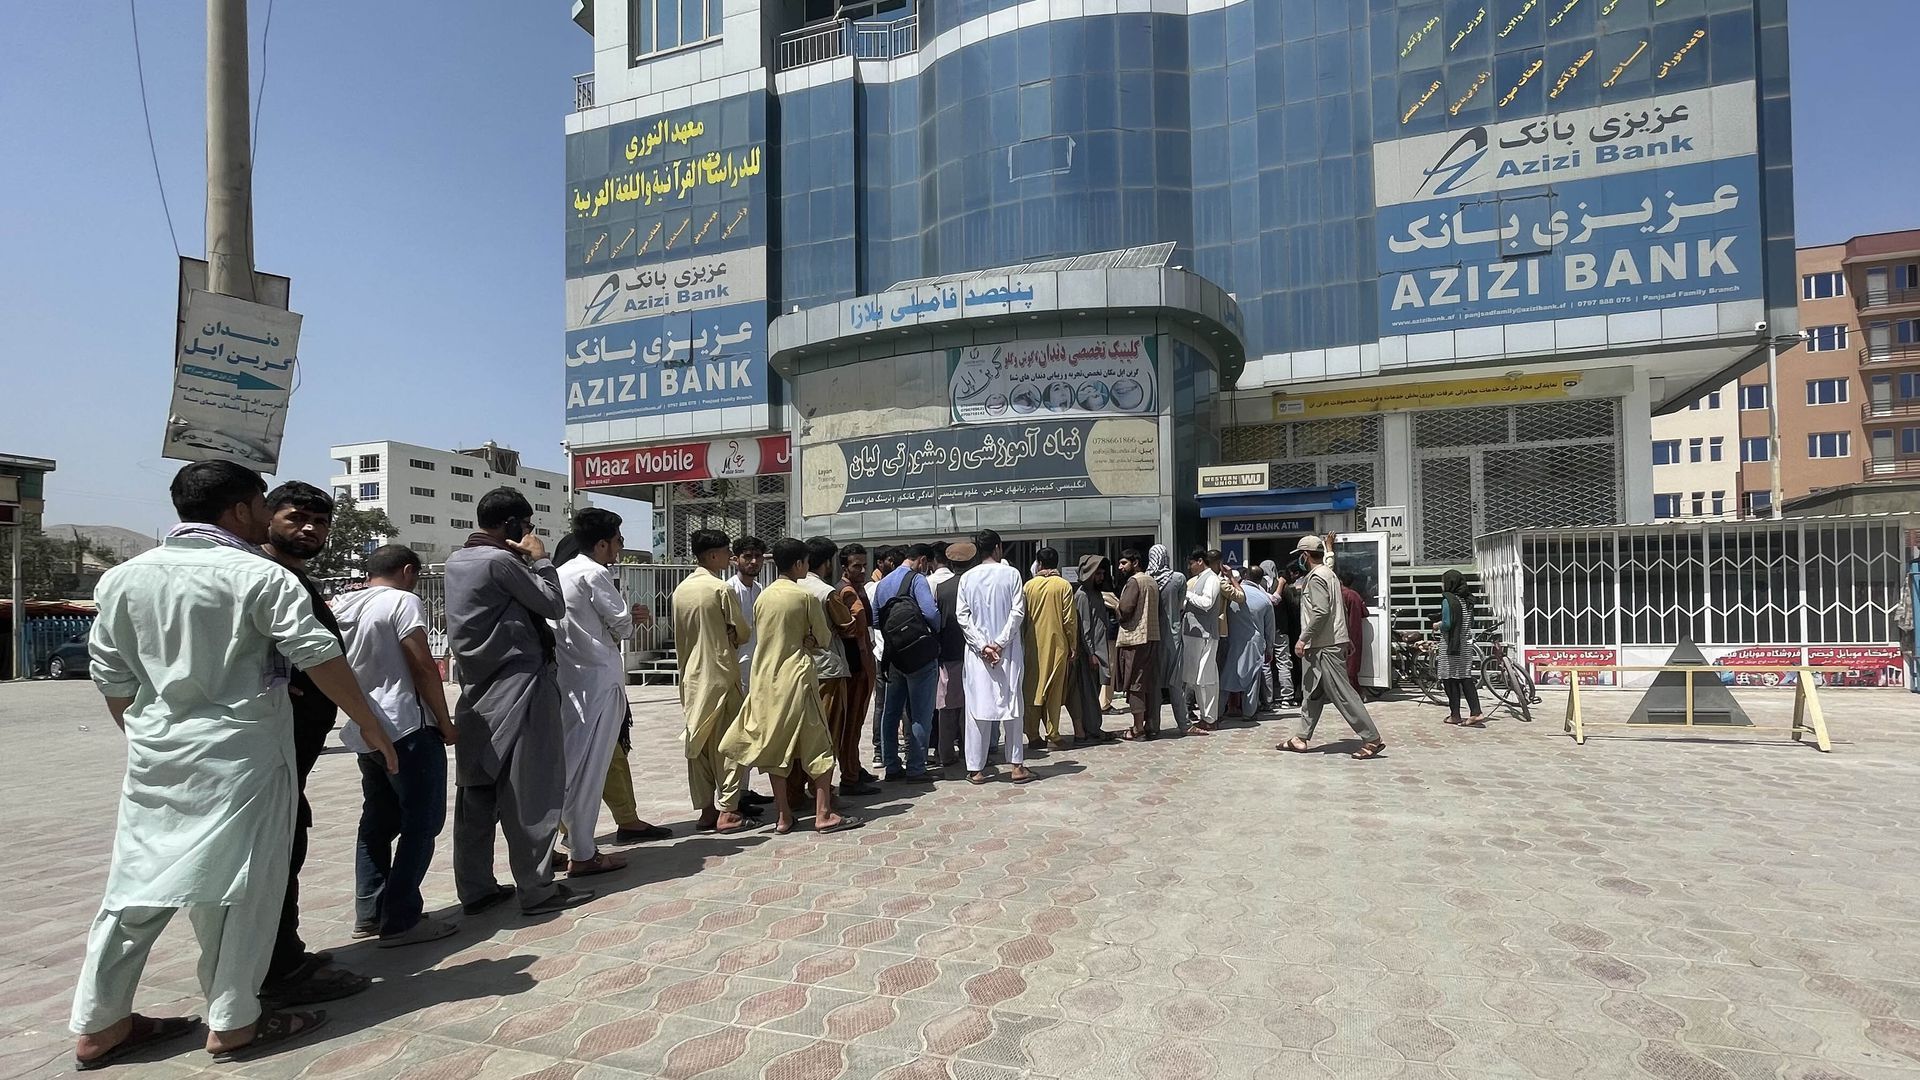 People line up outside AZIZI Bank to take out cash amid a money crisis in Kabul, Afghanistan, Aug. 15, 2021. Photo: Haroon Sabawoon/Getty Images